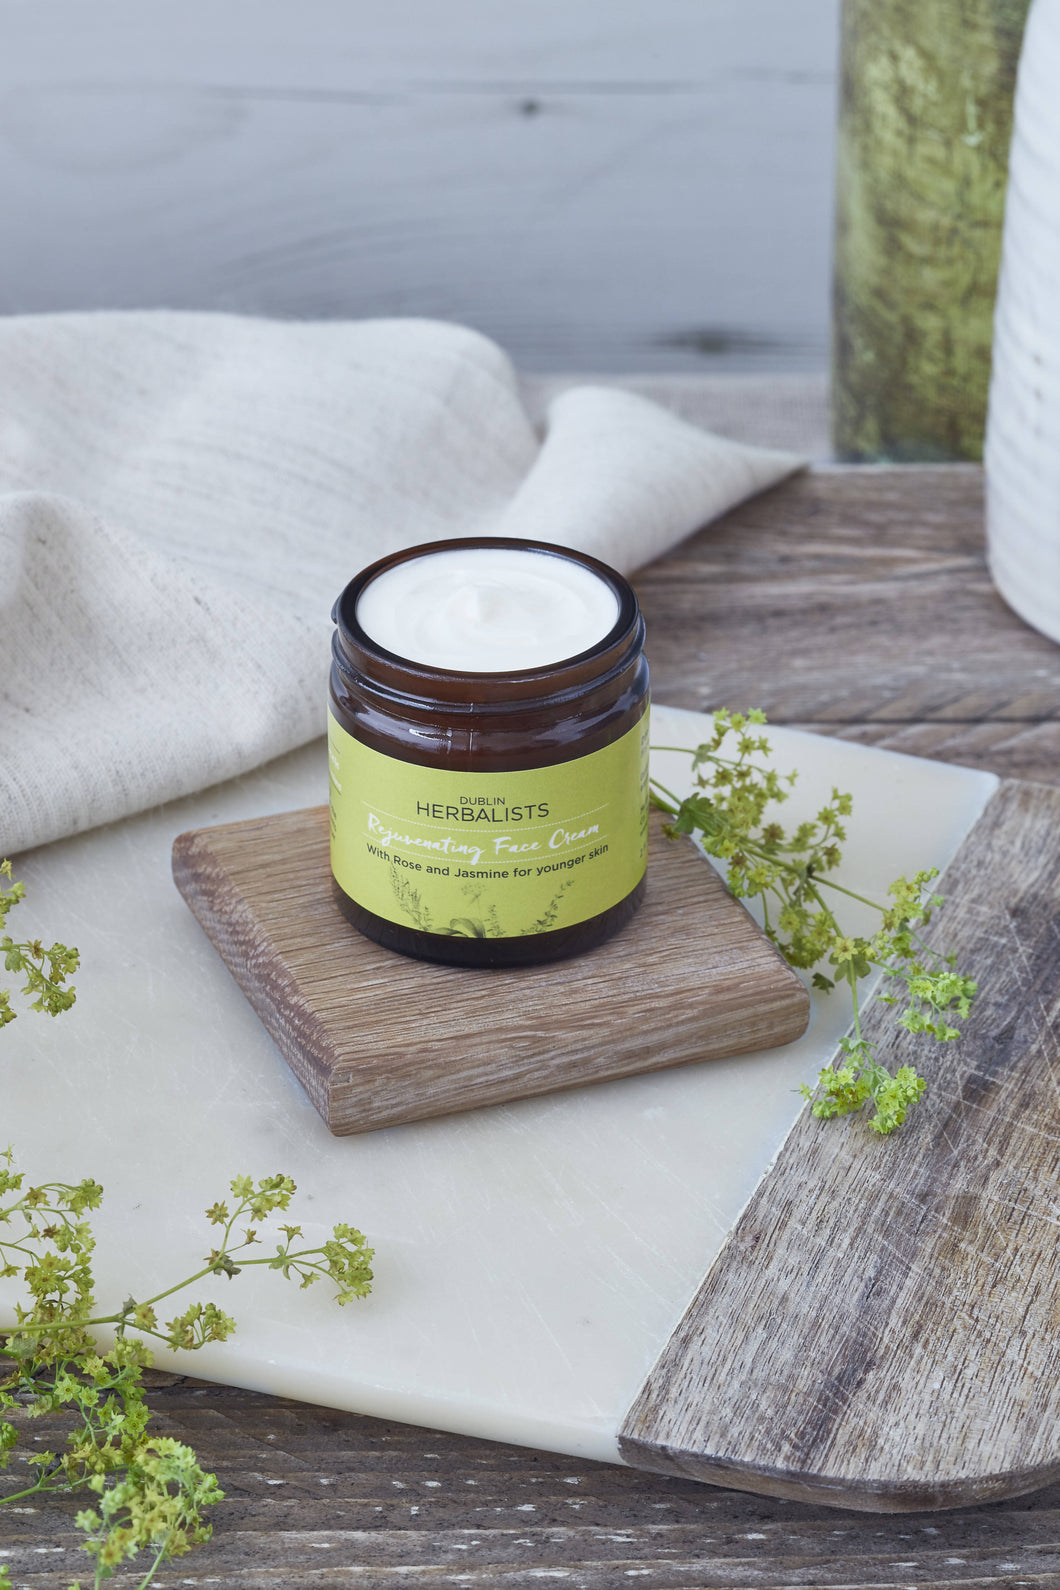 Rejuvenating Face Cream- With Rose and Jasmine for younger skin